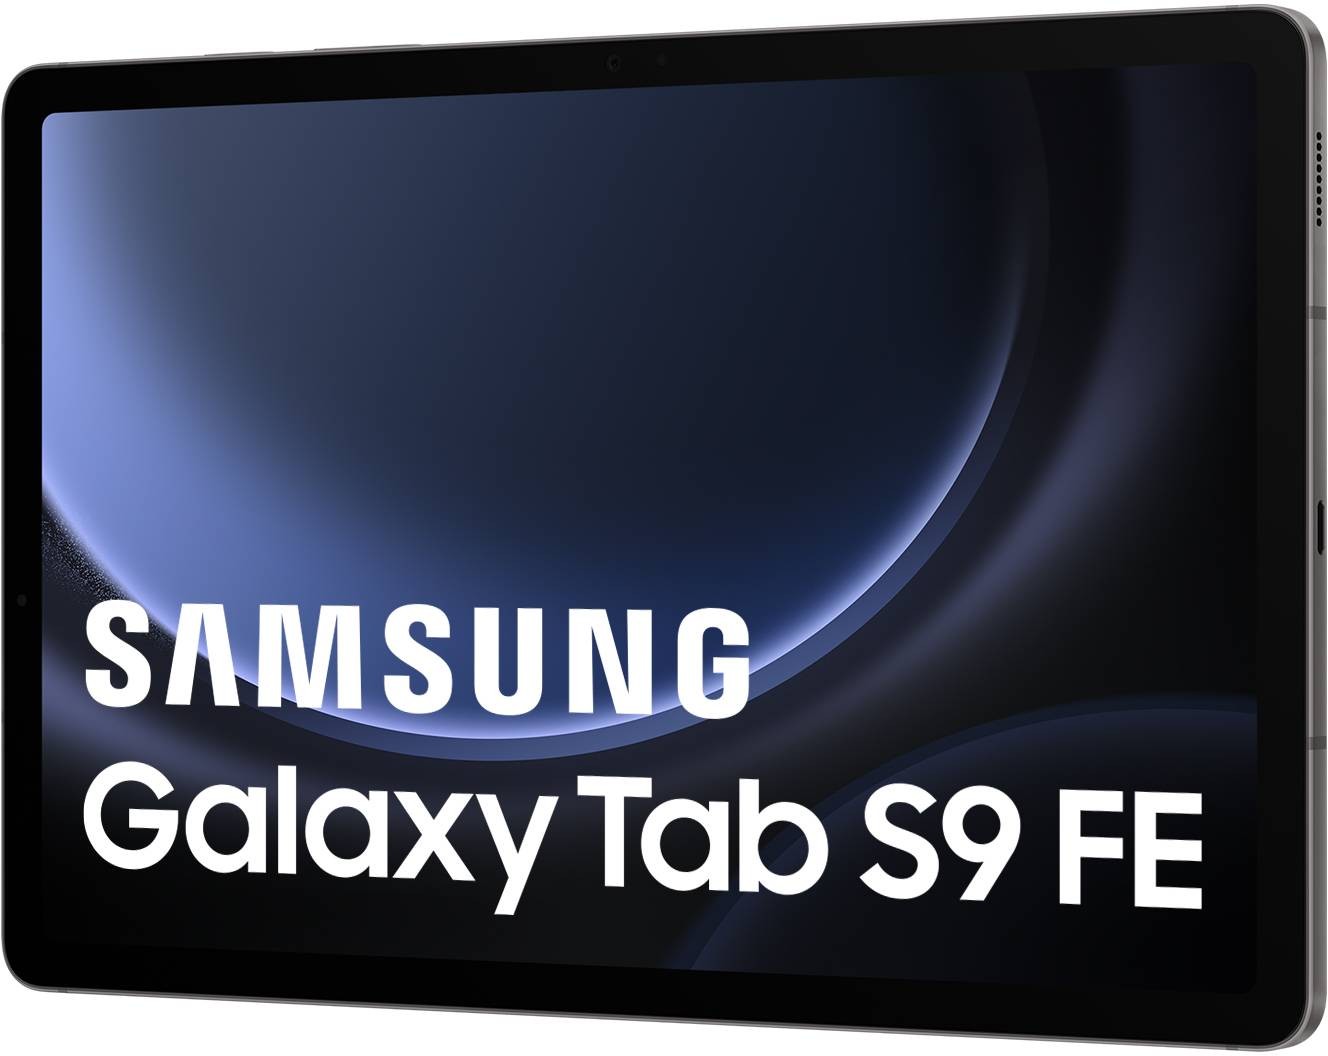 SAMSUNG Tablette tactile Galaxy Tab S9 FE 256go Anthracite  - SM-X510NZAEEUB